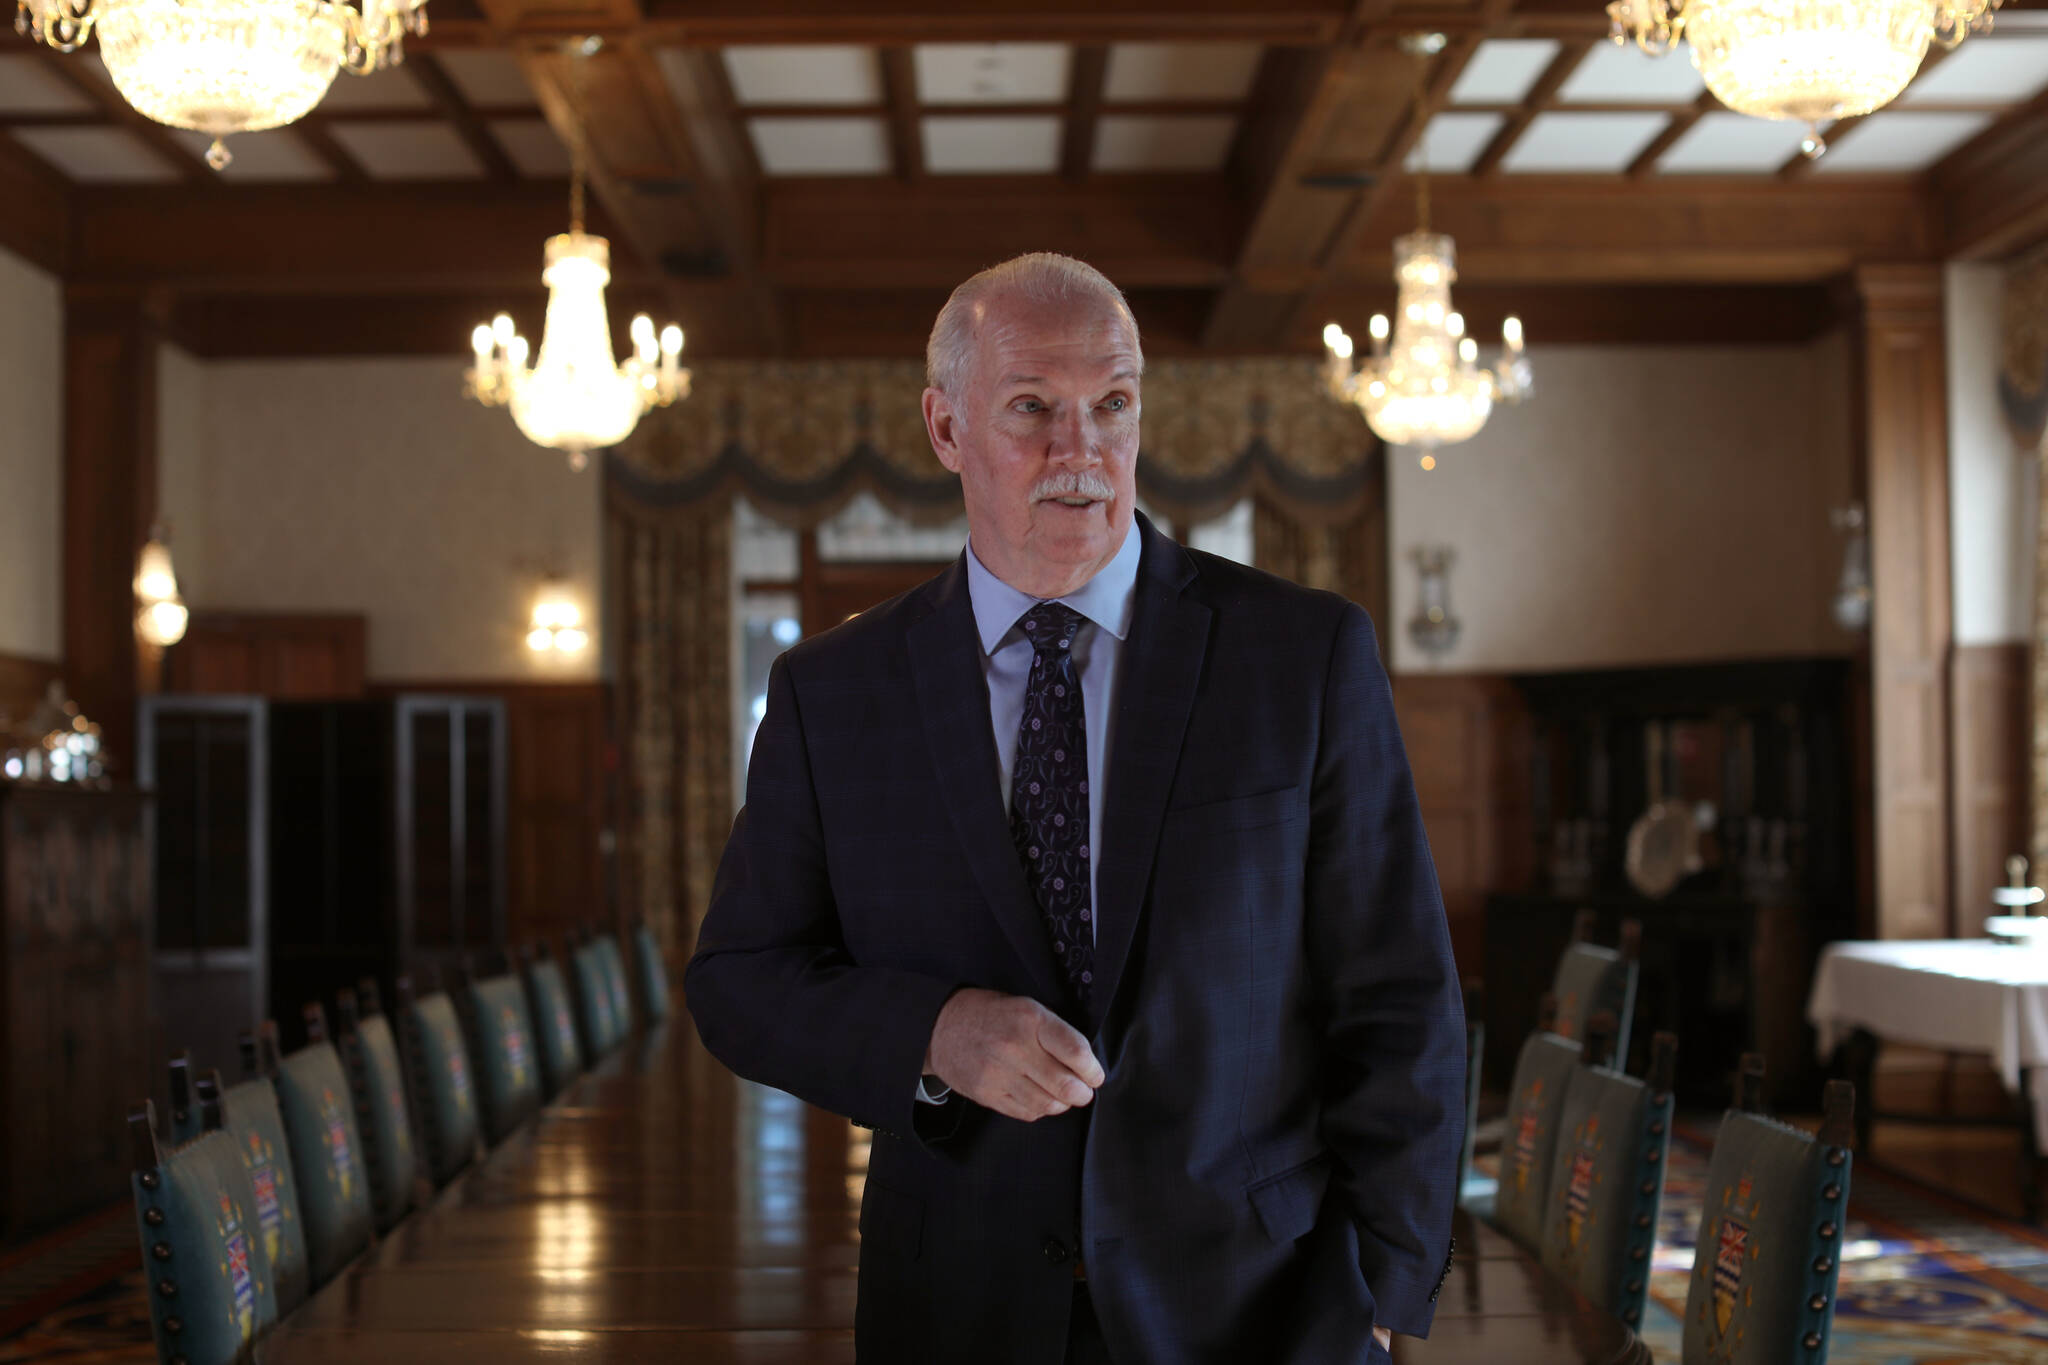 British Columbia Premier John Horgan poses for a portrait after a swearing-in ceremony at Government House in Victoria, Friday, Feb. 25, 2022. THE CANADIAN PRESS/Chad Hipolito